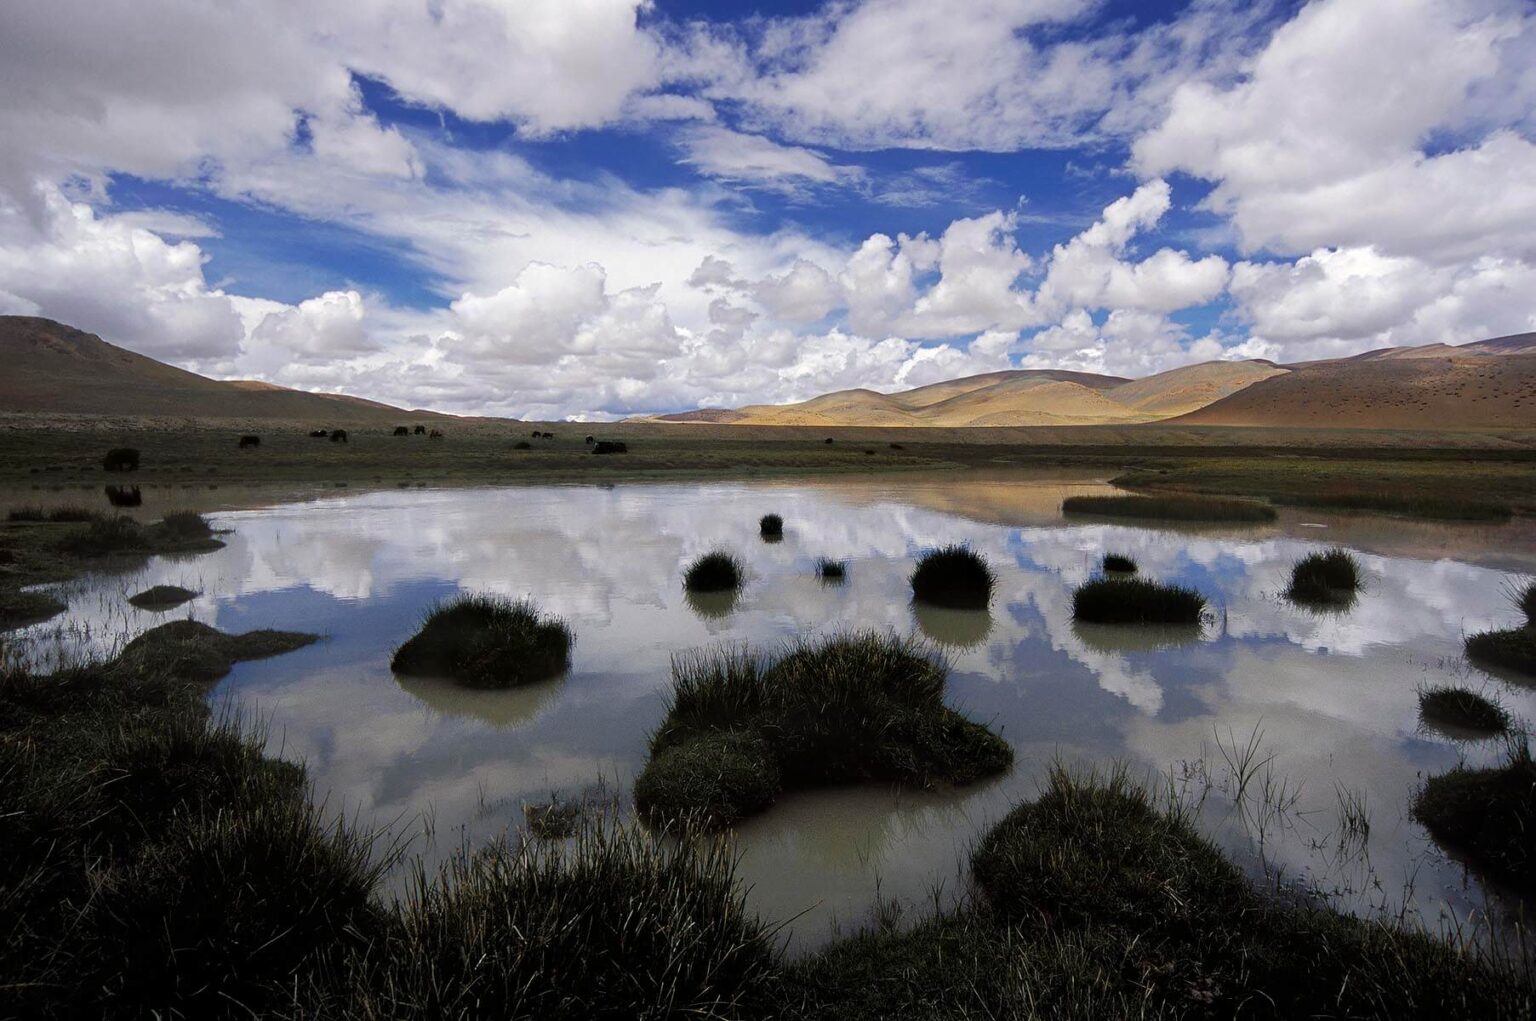 Small lake with cloud reflection - TIBET